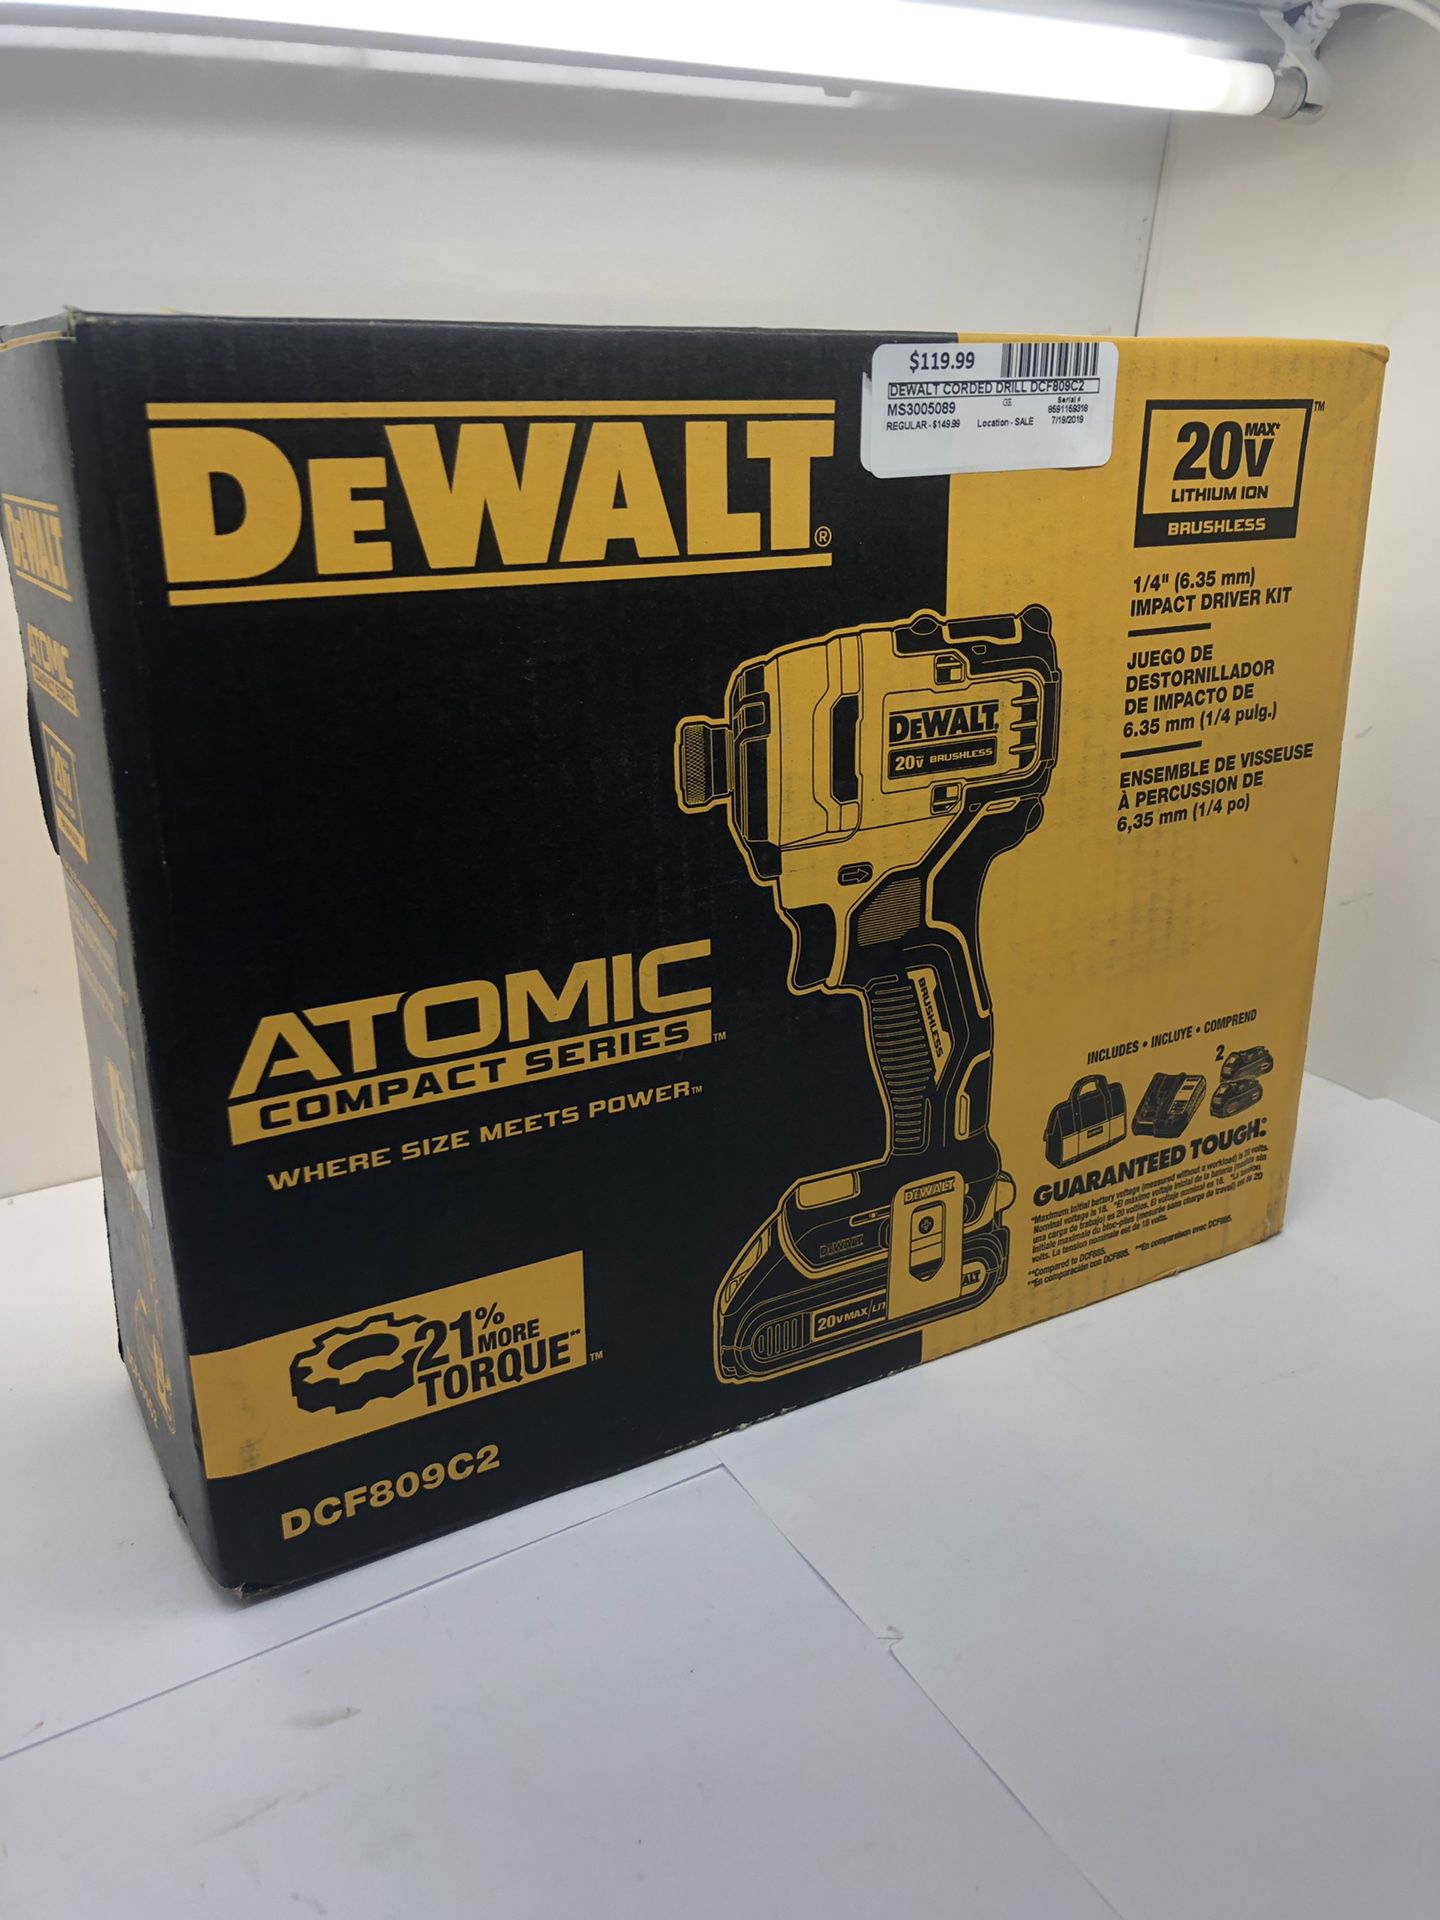 Dewalt 20v atomic Compact Series with 2 batteries and chgr